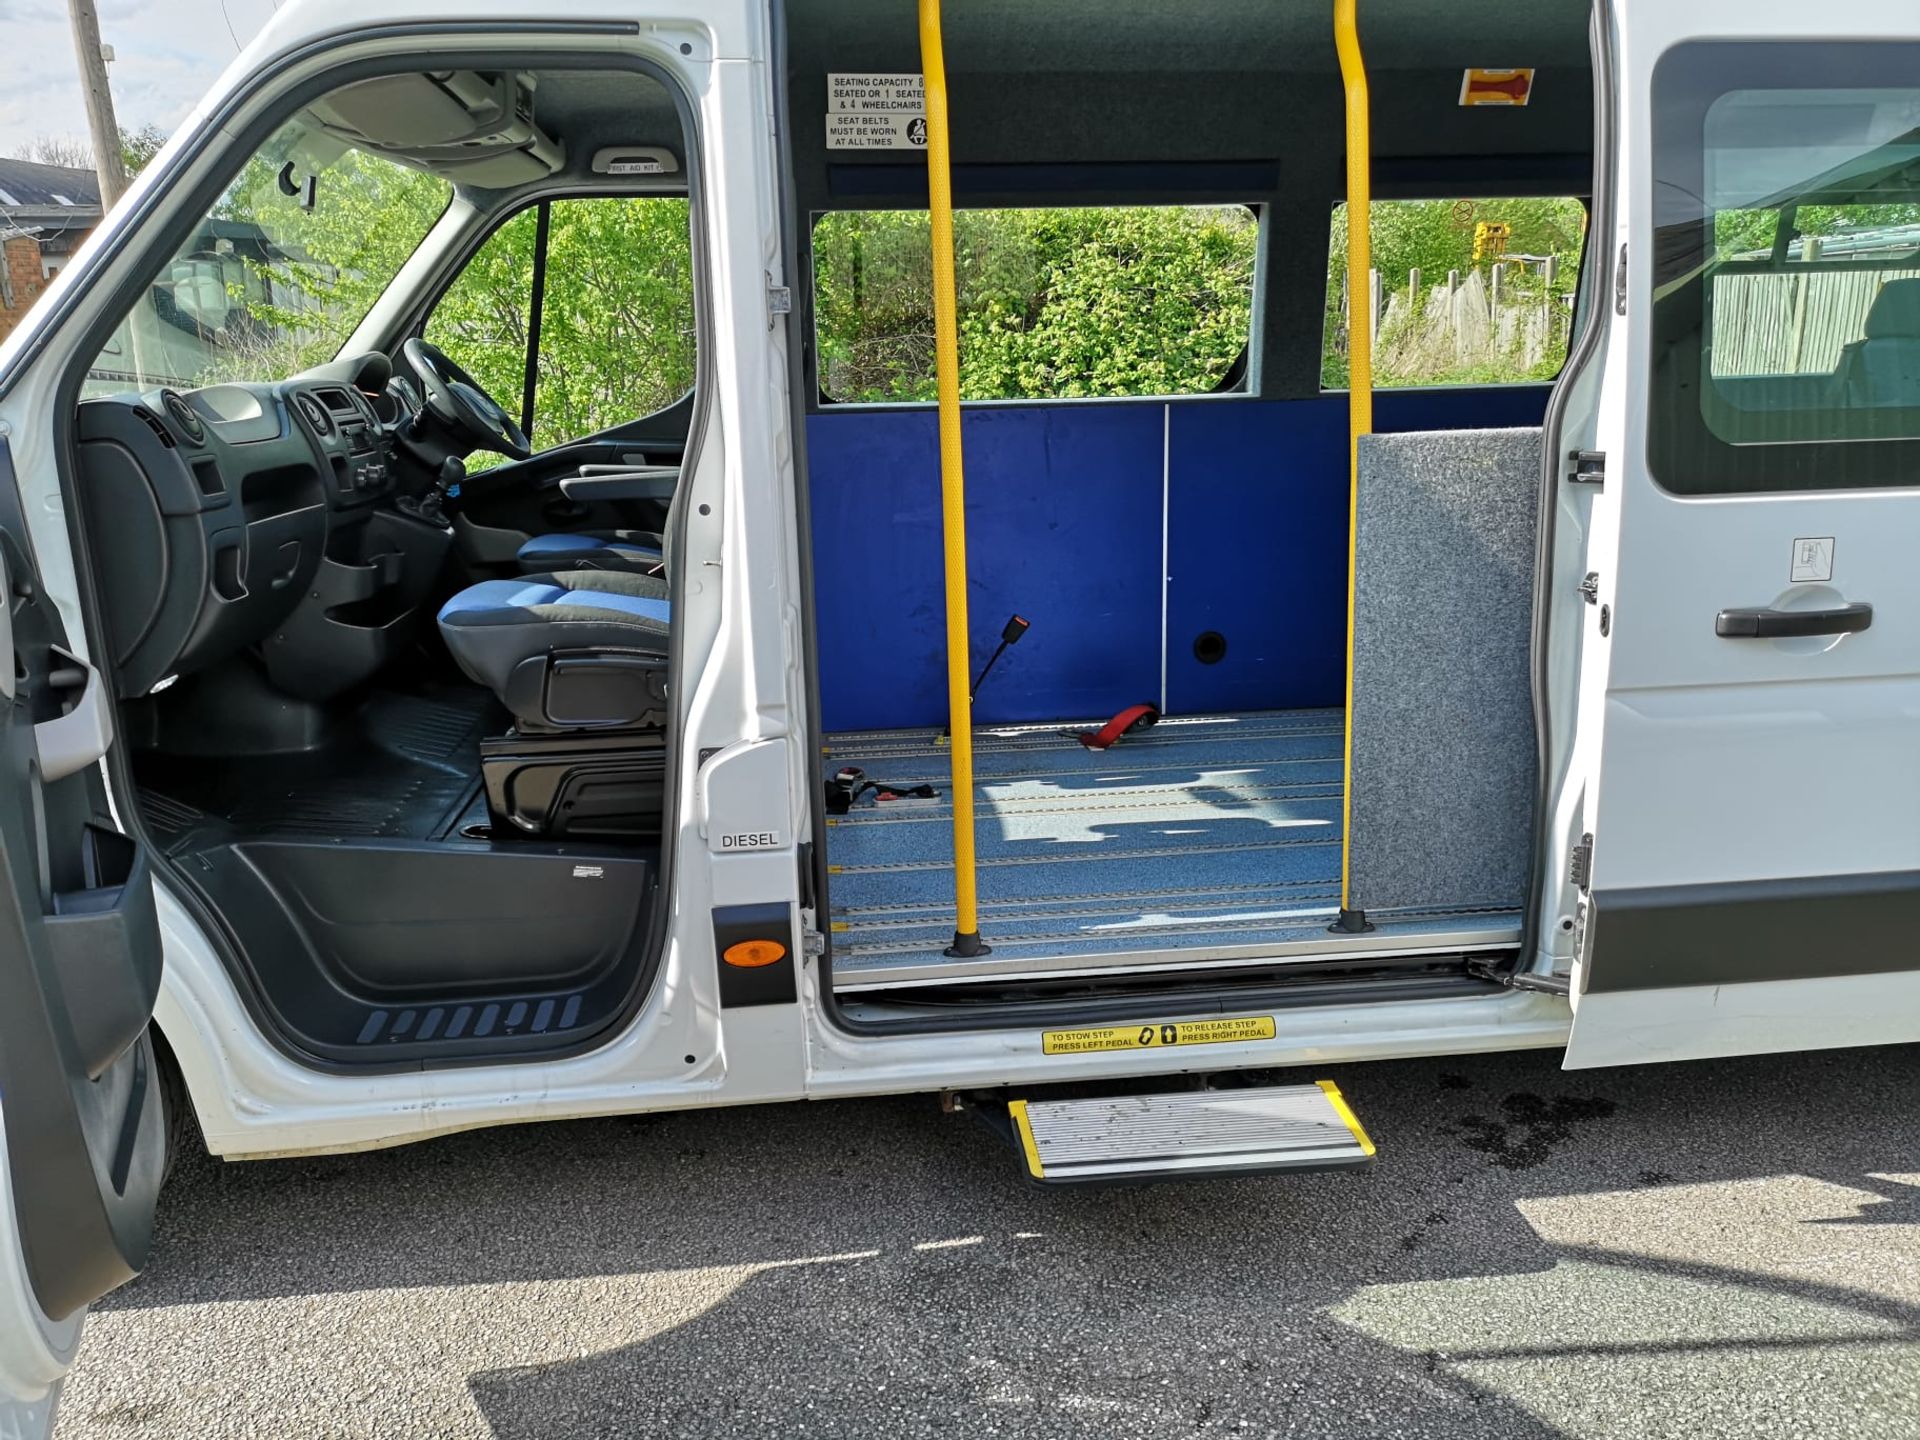 2015/15 REG RENAULT MASTER LM35 DCI 100 2.2 DIESEL MANUAL VAN WITH DISABLED RAMP REAR ACCESS *NO VAT - Image 12 of 20